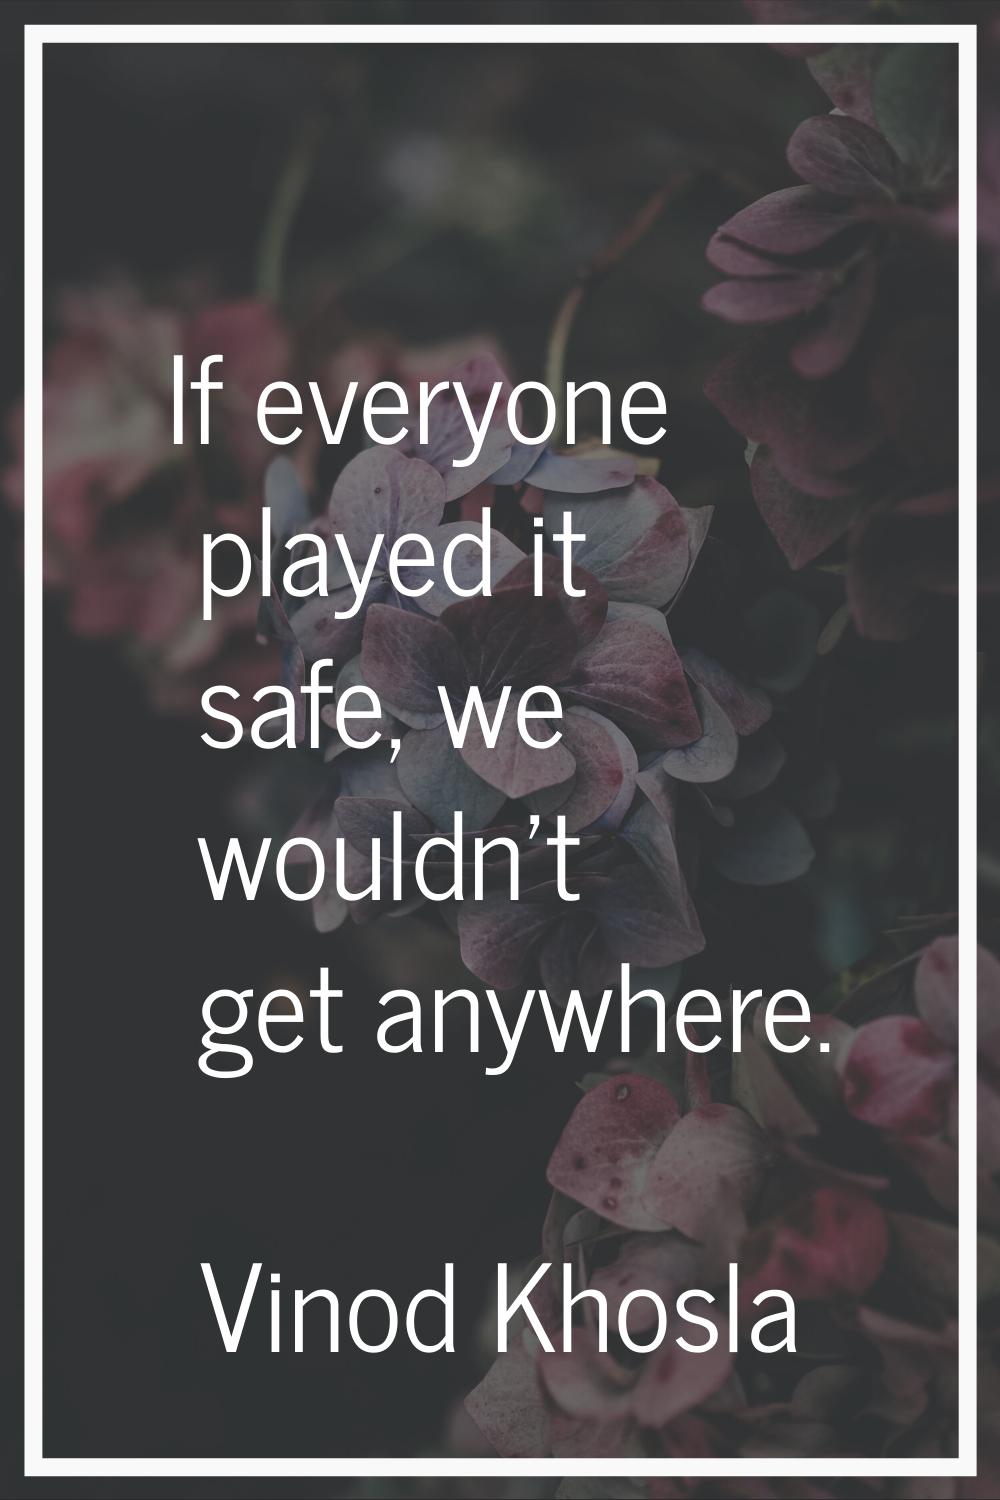 If everyone played it safe, we wouldn't get anywhere.